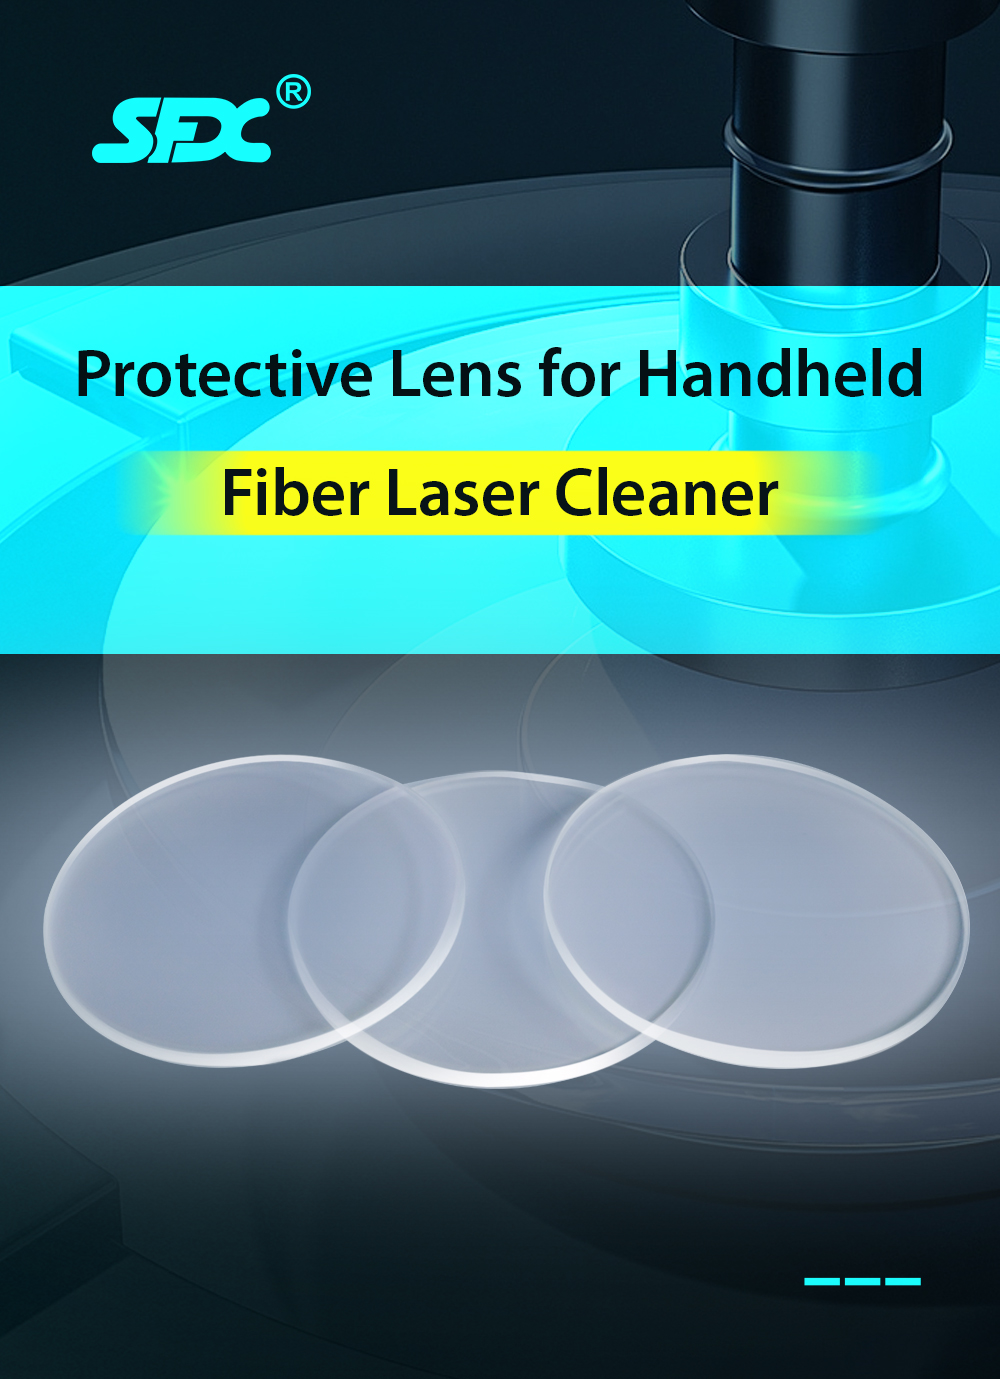 Laser Protective Lenses for SFX 500W Pulse Laser Cleaning Machine 3pcs/10pcs Package Available Laser Protective Lenses for SFX 500W Pulse Laser Cleaning Machine 3pcs/10pcs Package Available laser protective lense,SFX laser,SFX laser 500w pulse laser protective lens